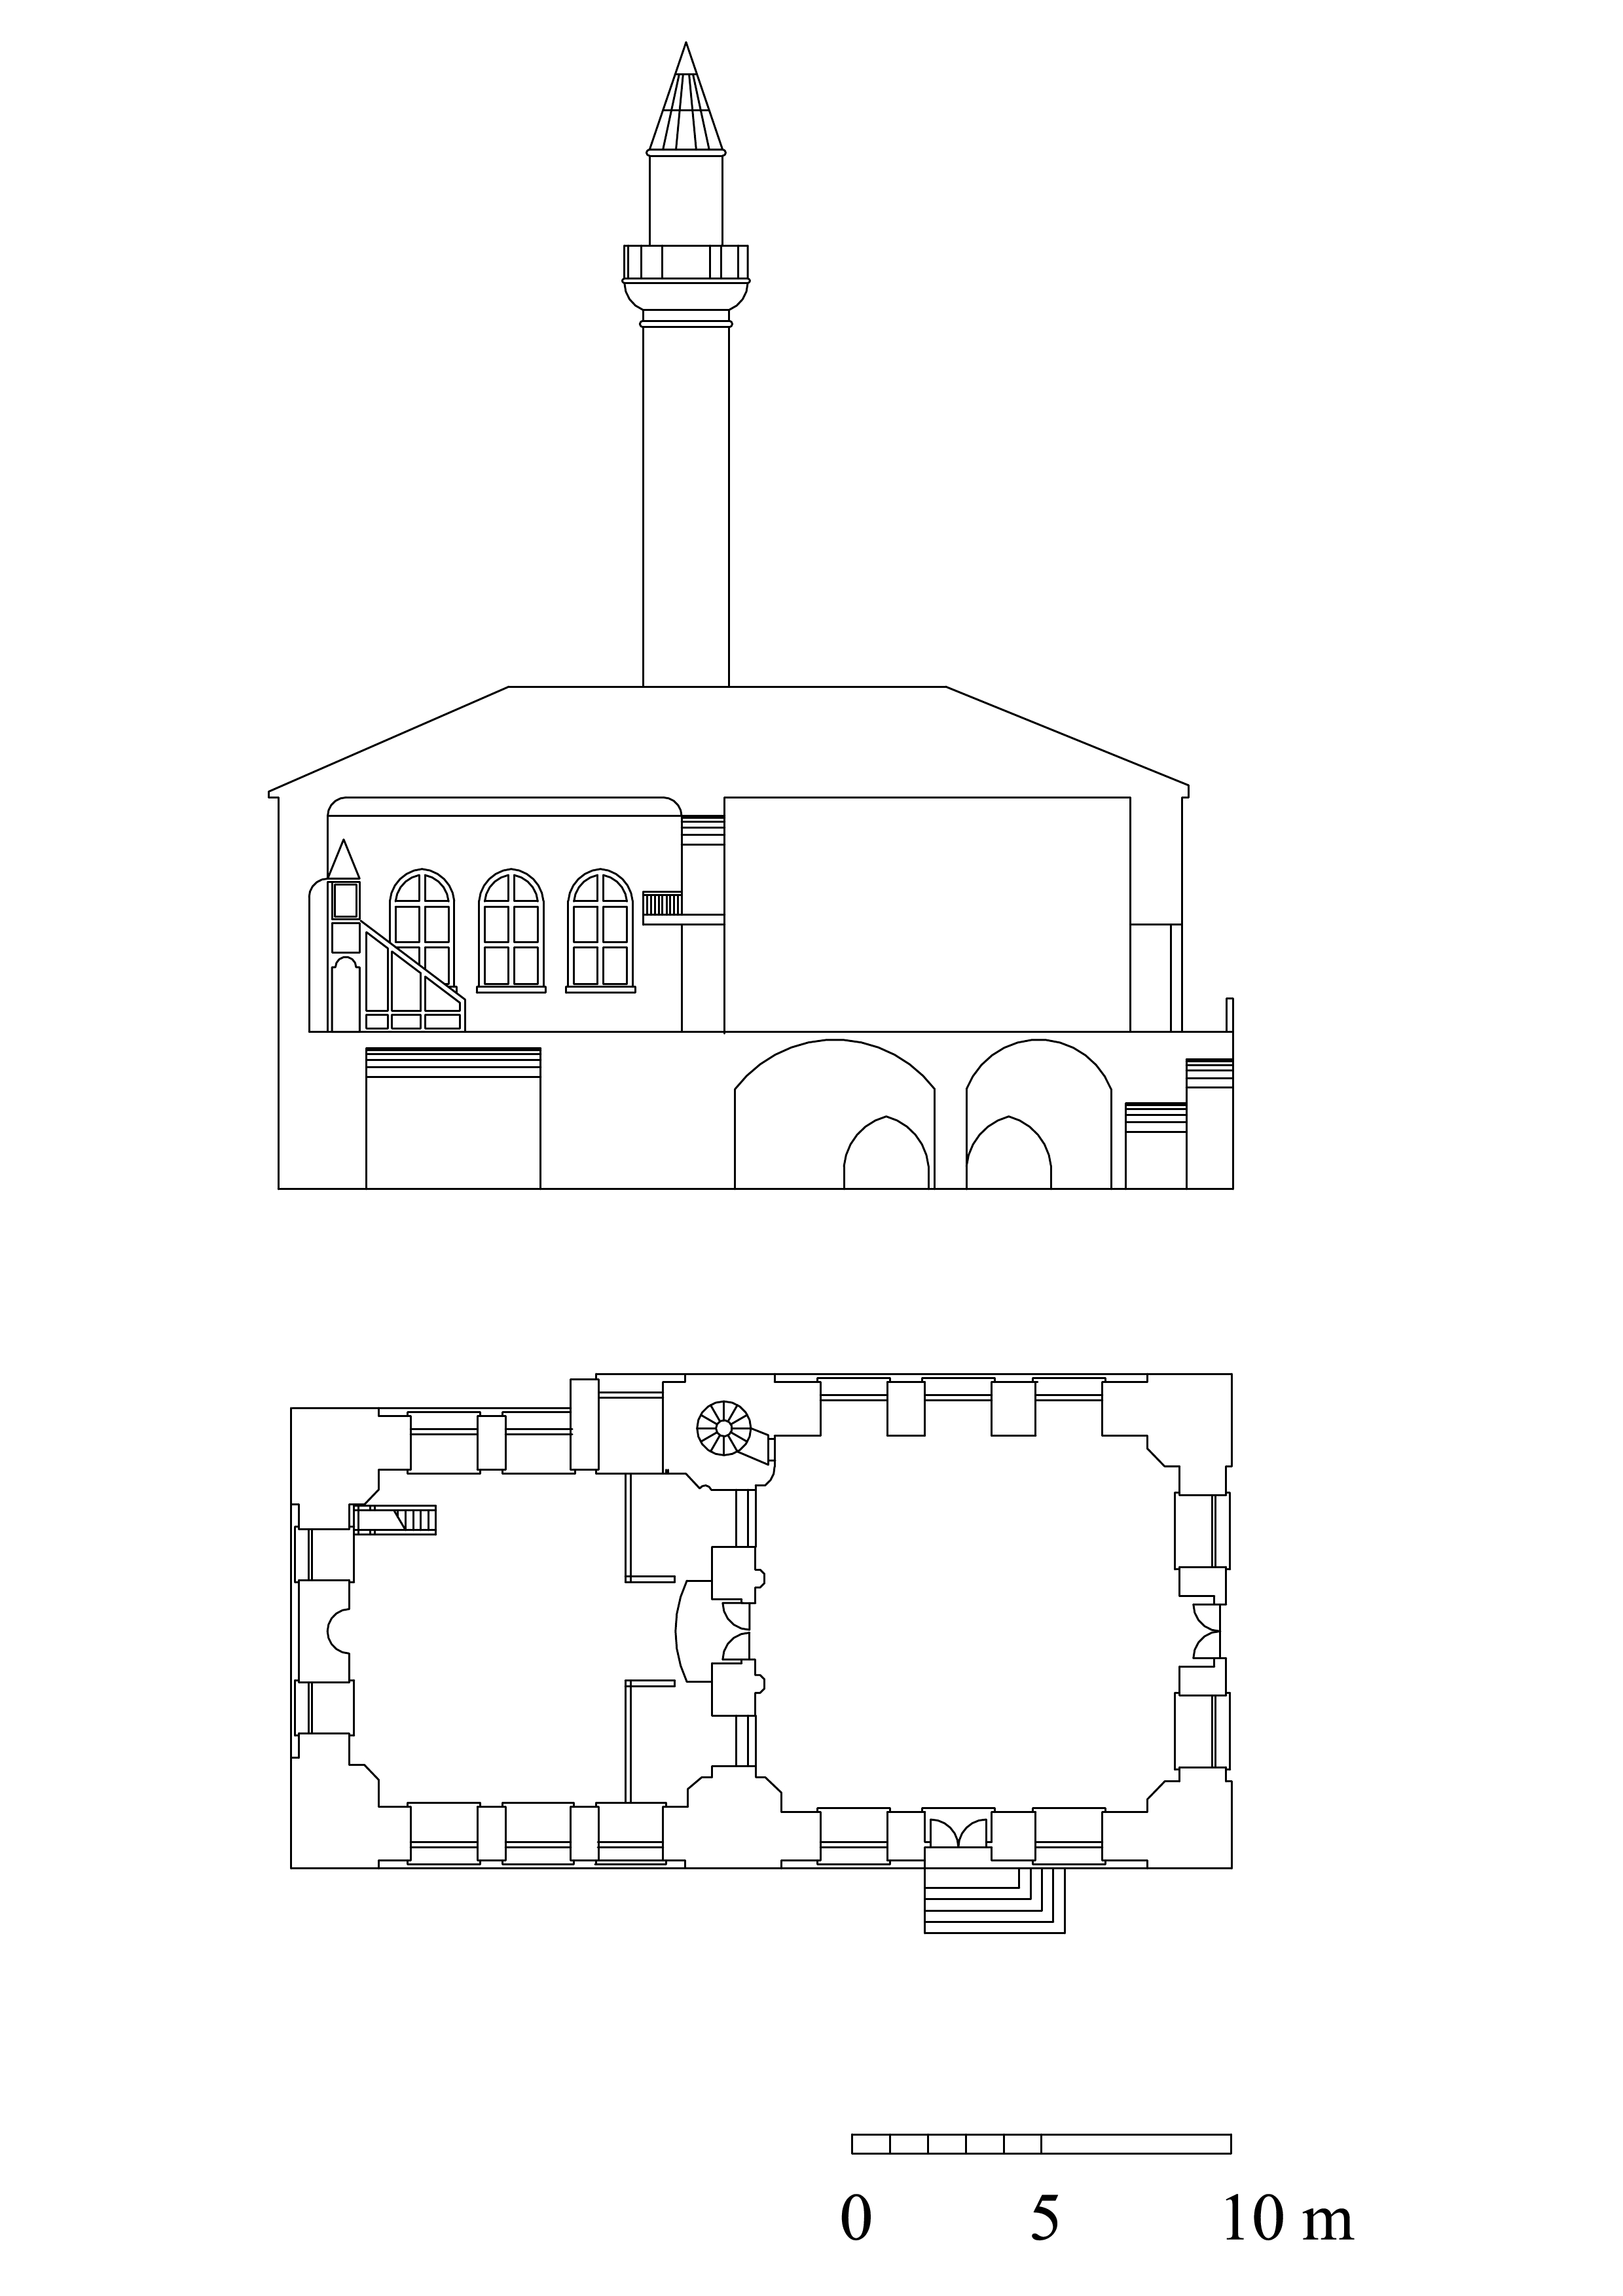 Floor plan and section of Kapiagasi Mahmud Aga Mosque